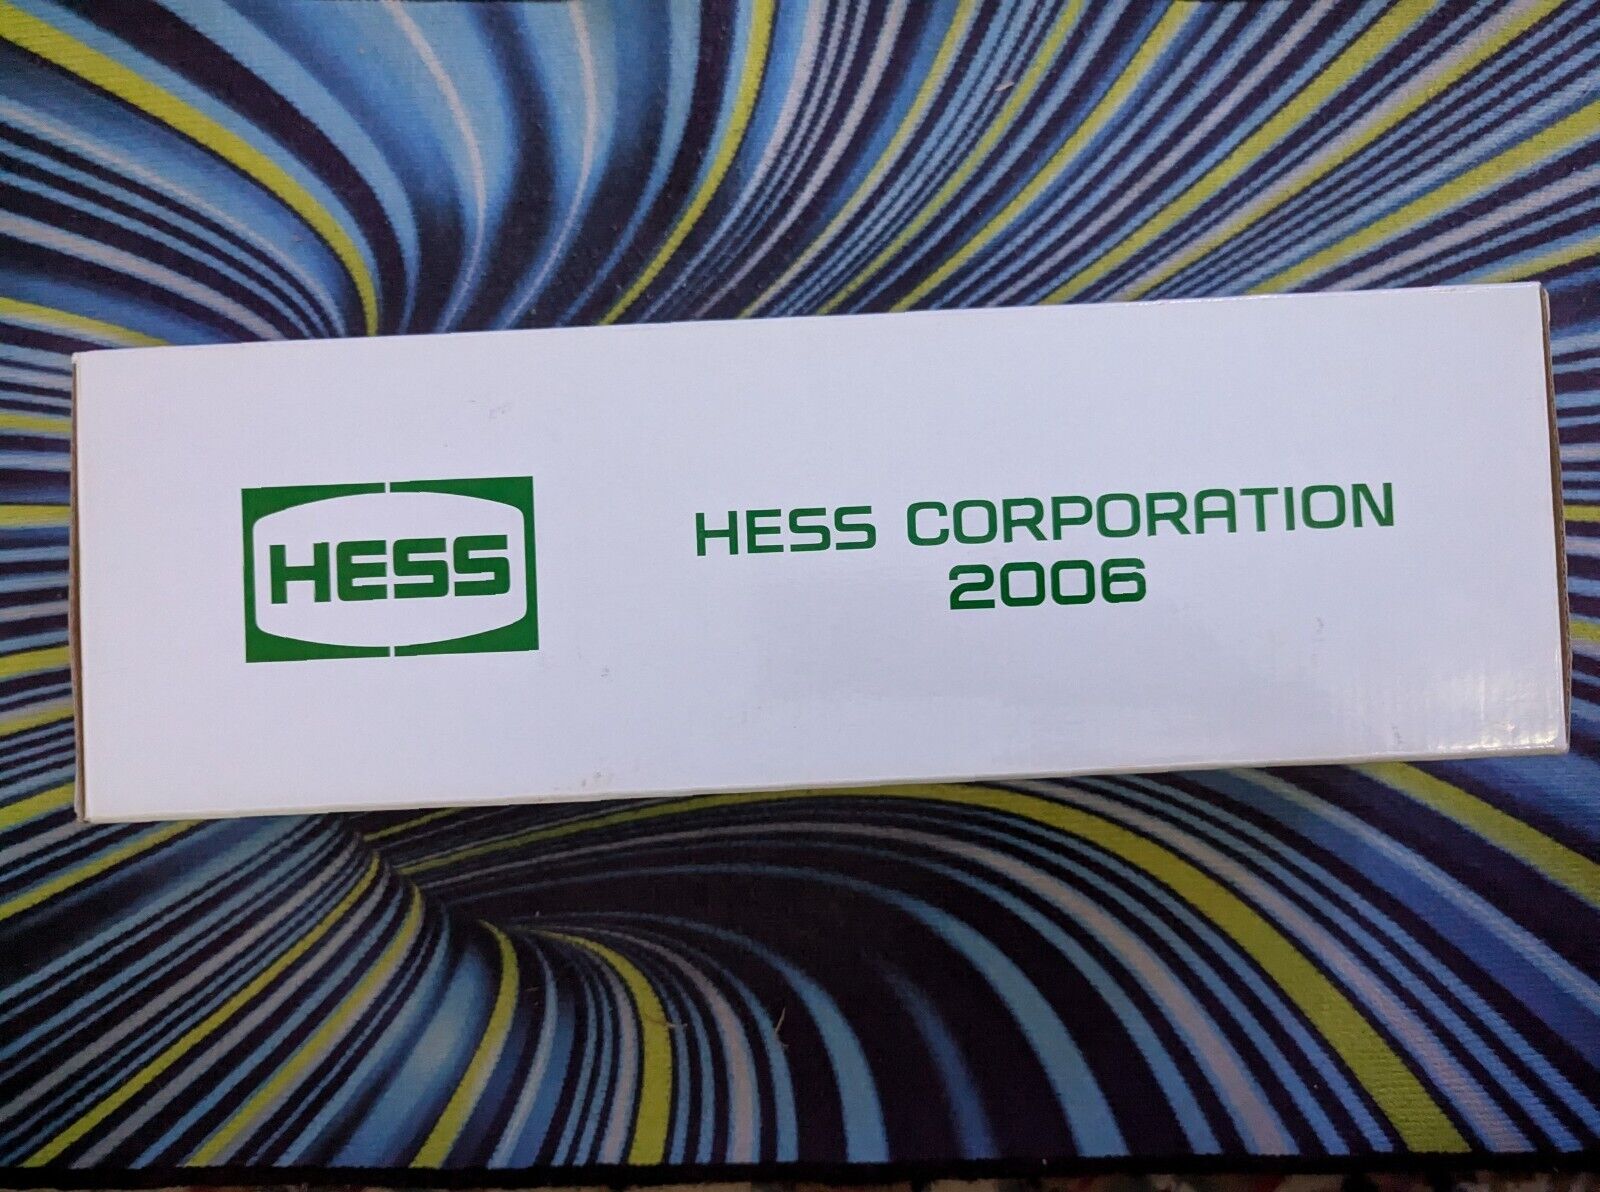 Hess Gasoline 2006 Toy Tanker Truck For The New York Stock Exchange